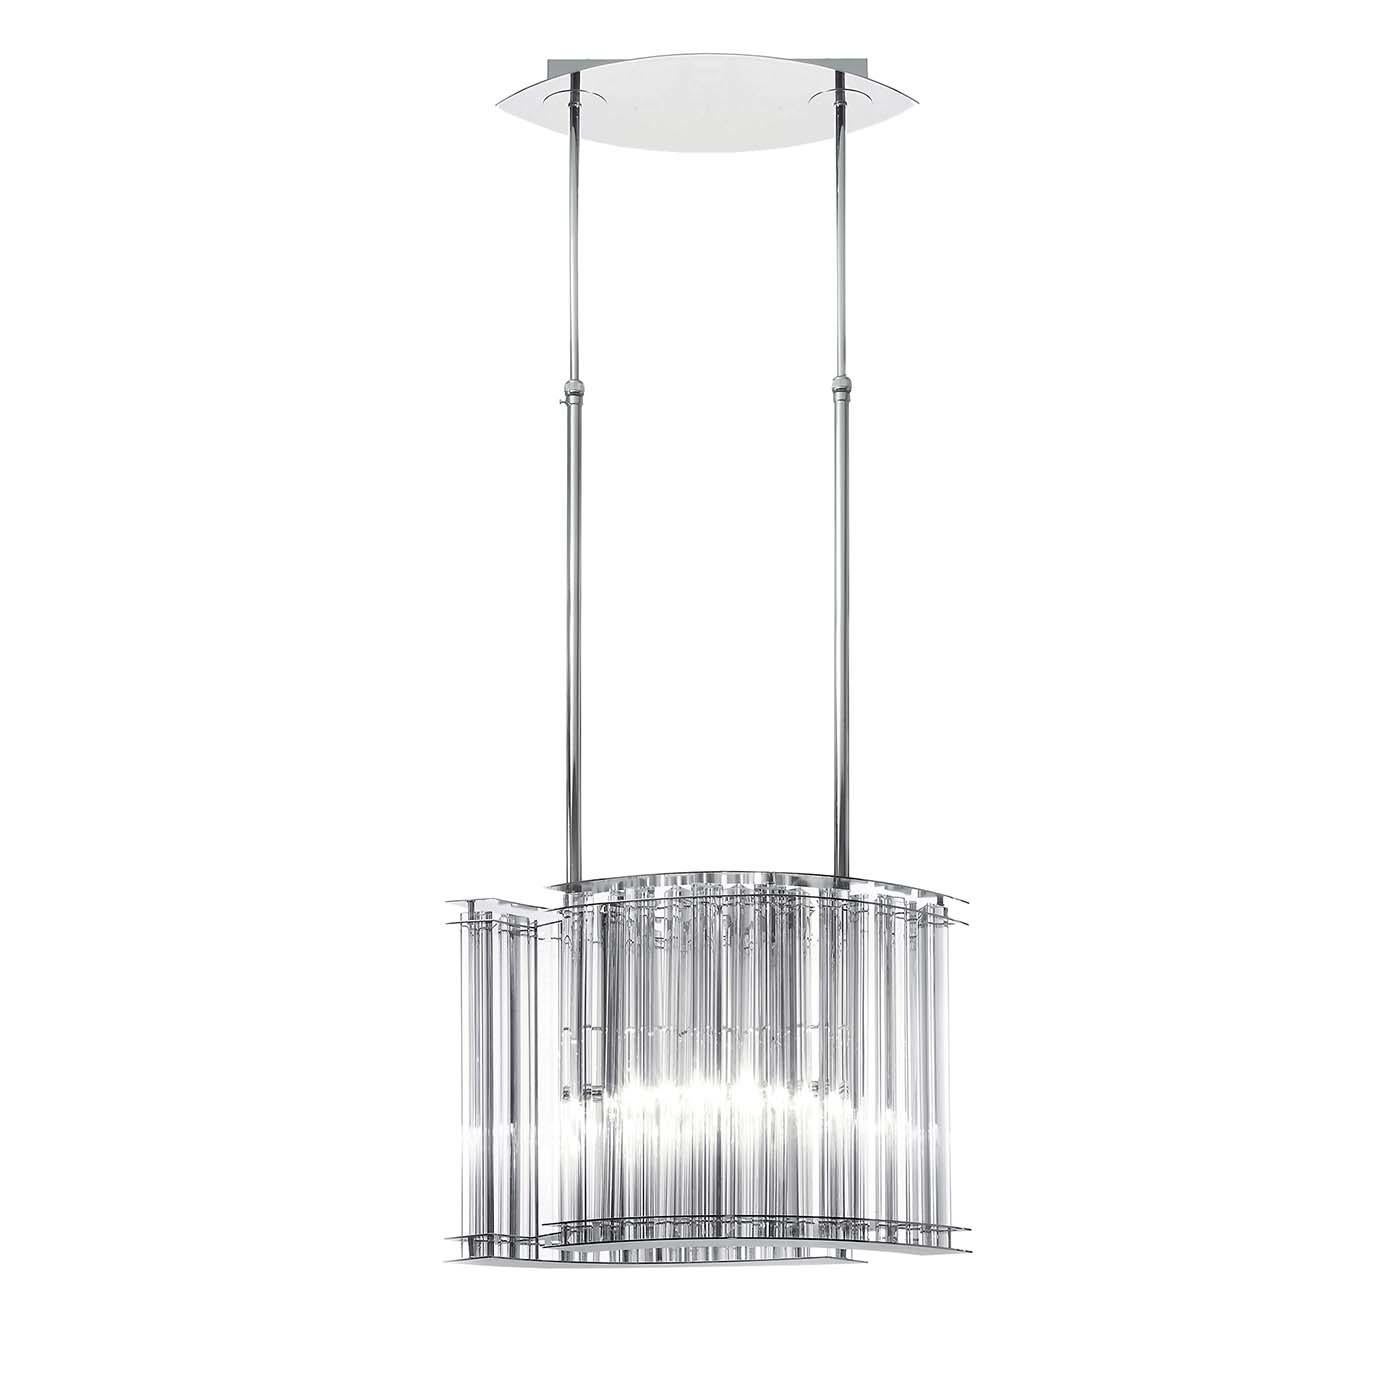 This stunning ceiling lamp boasts a silhouette crafted of metal with nickel finish hanging on two poles attached to the ceiling and comprising two curves that form an open elliptical shape. The two elements diffuse the light shining from inside,